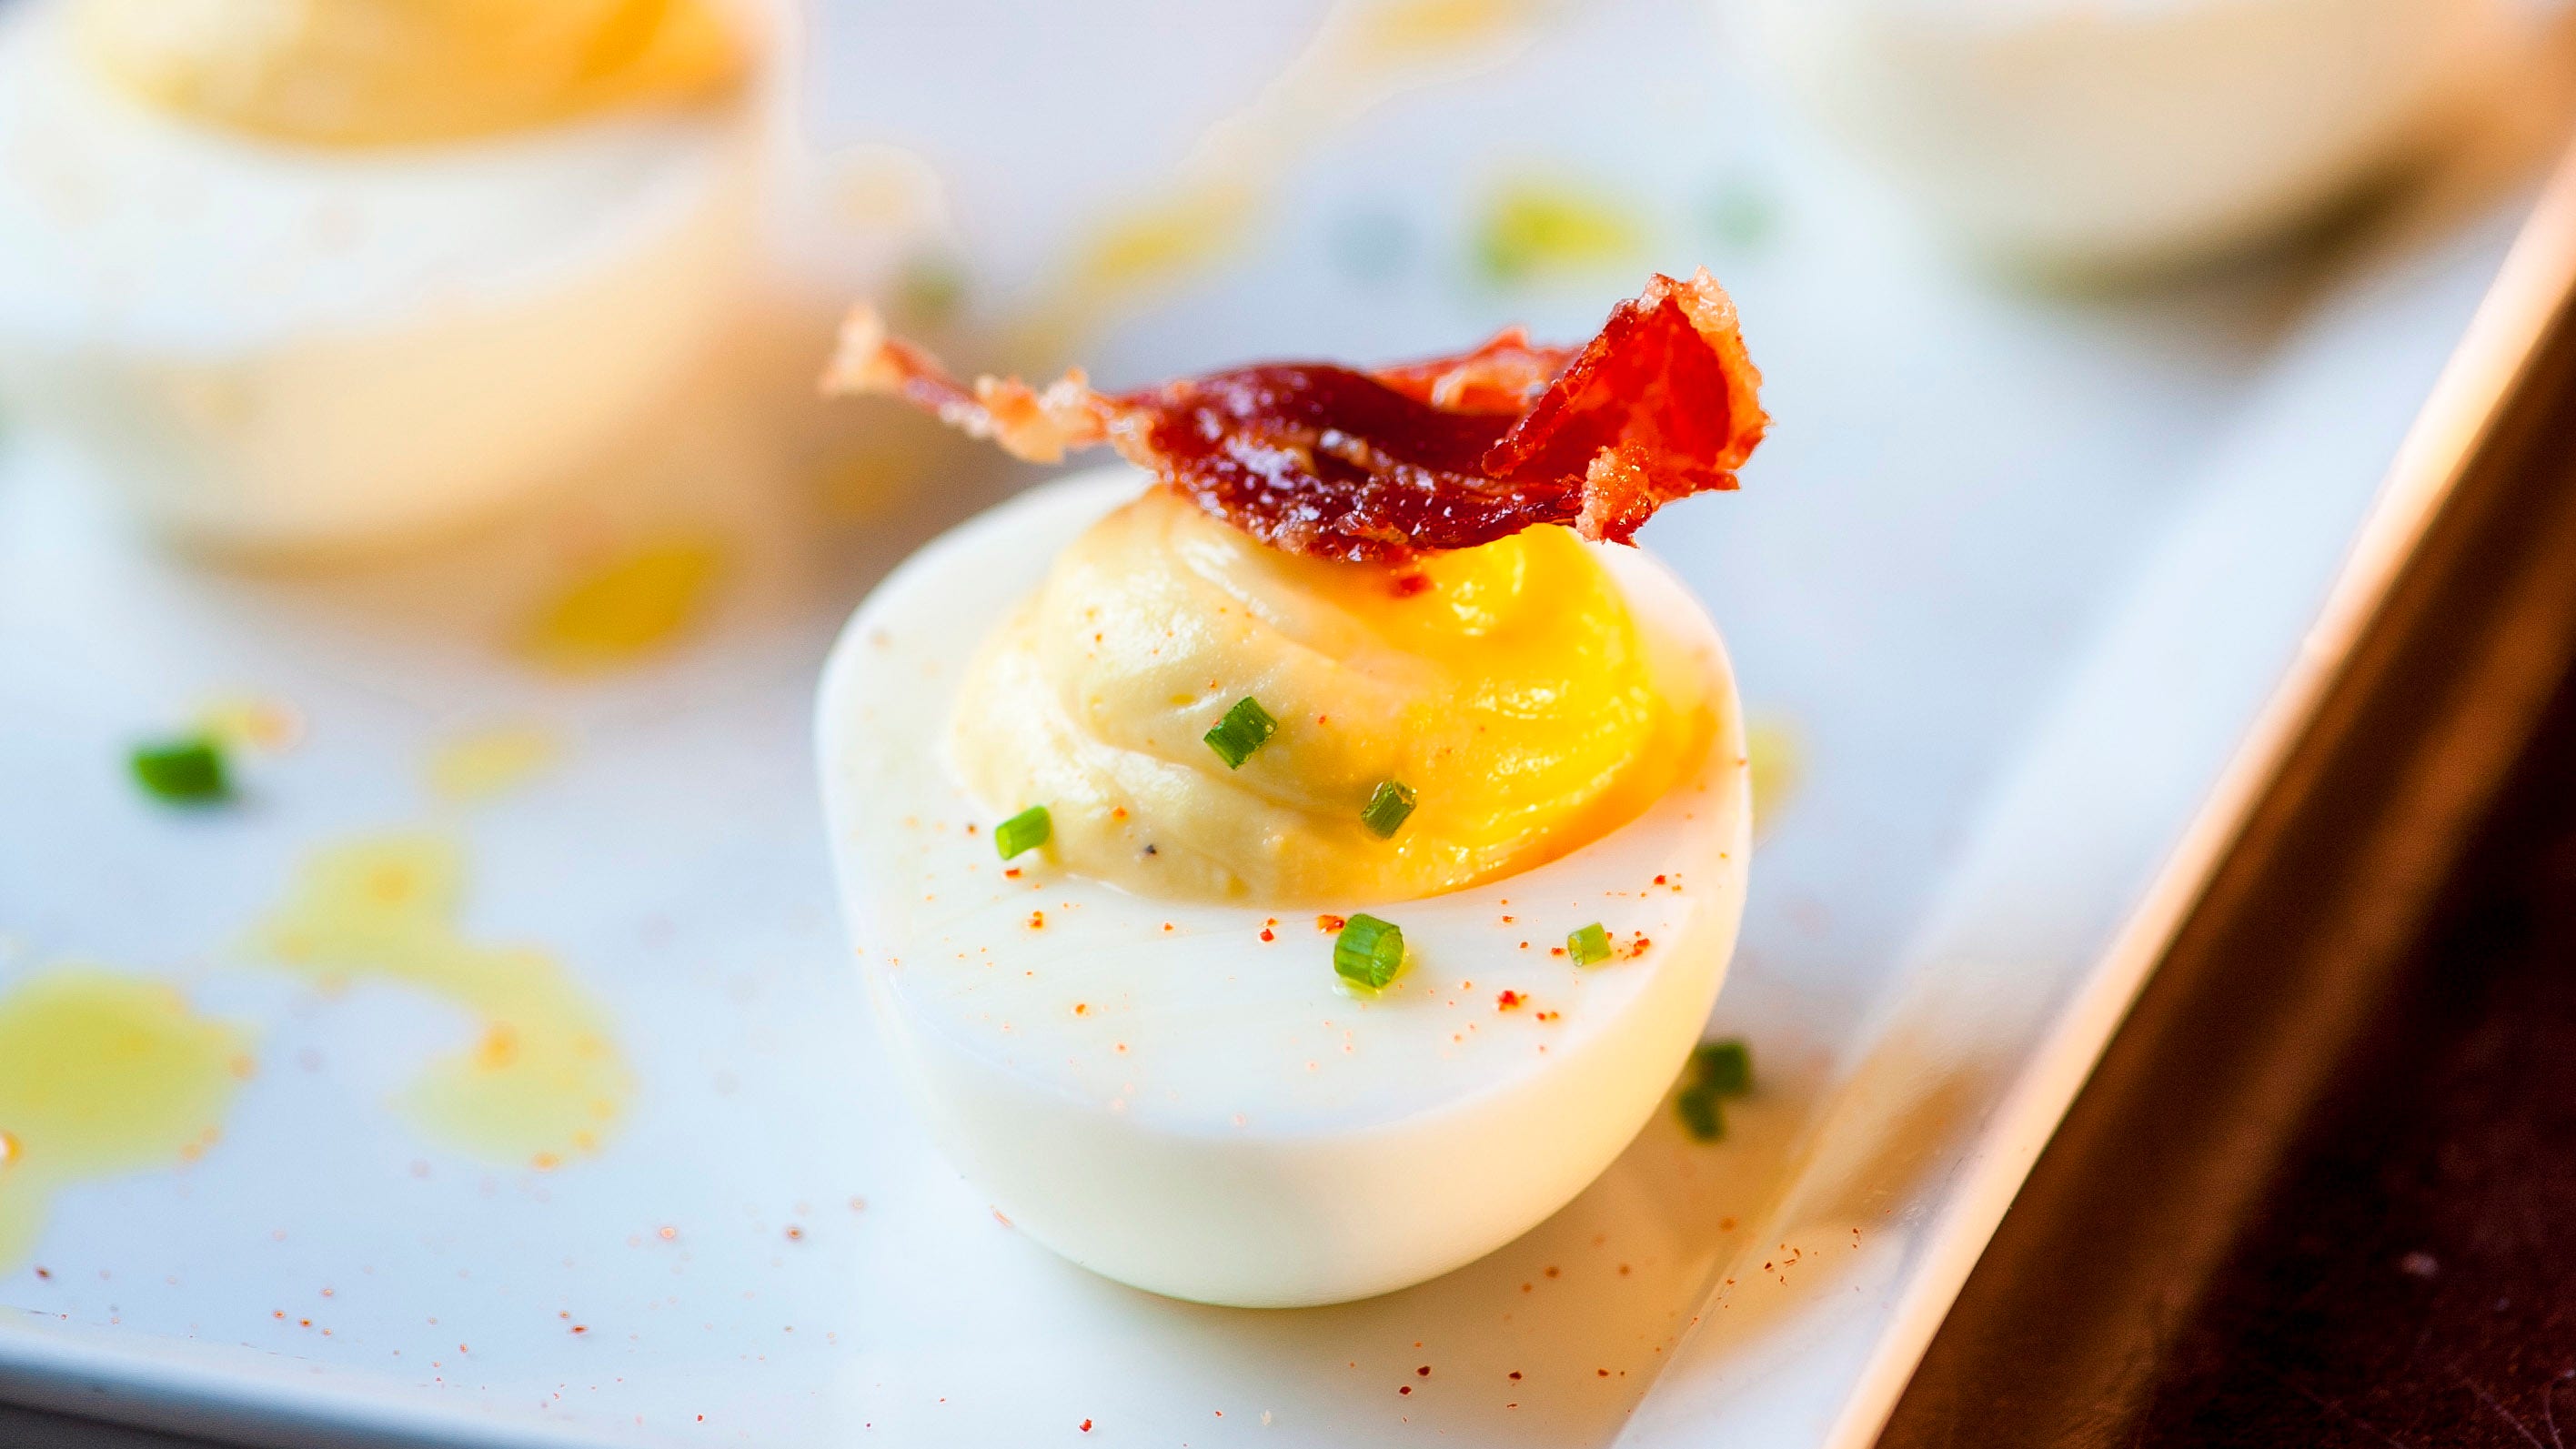 South Carolina chef reveals his crave-worthy deviled eggs recipe: Try it